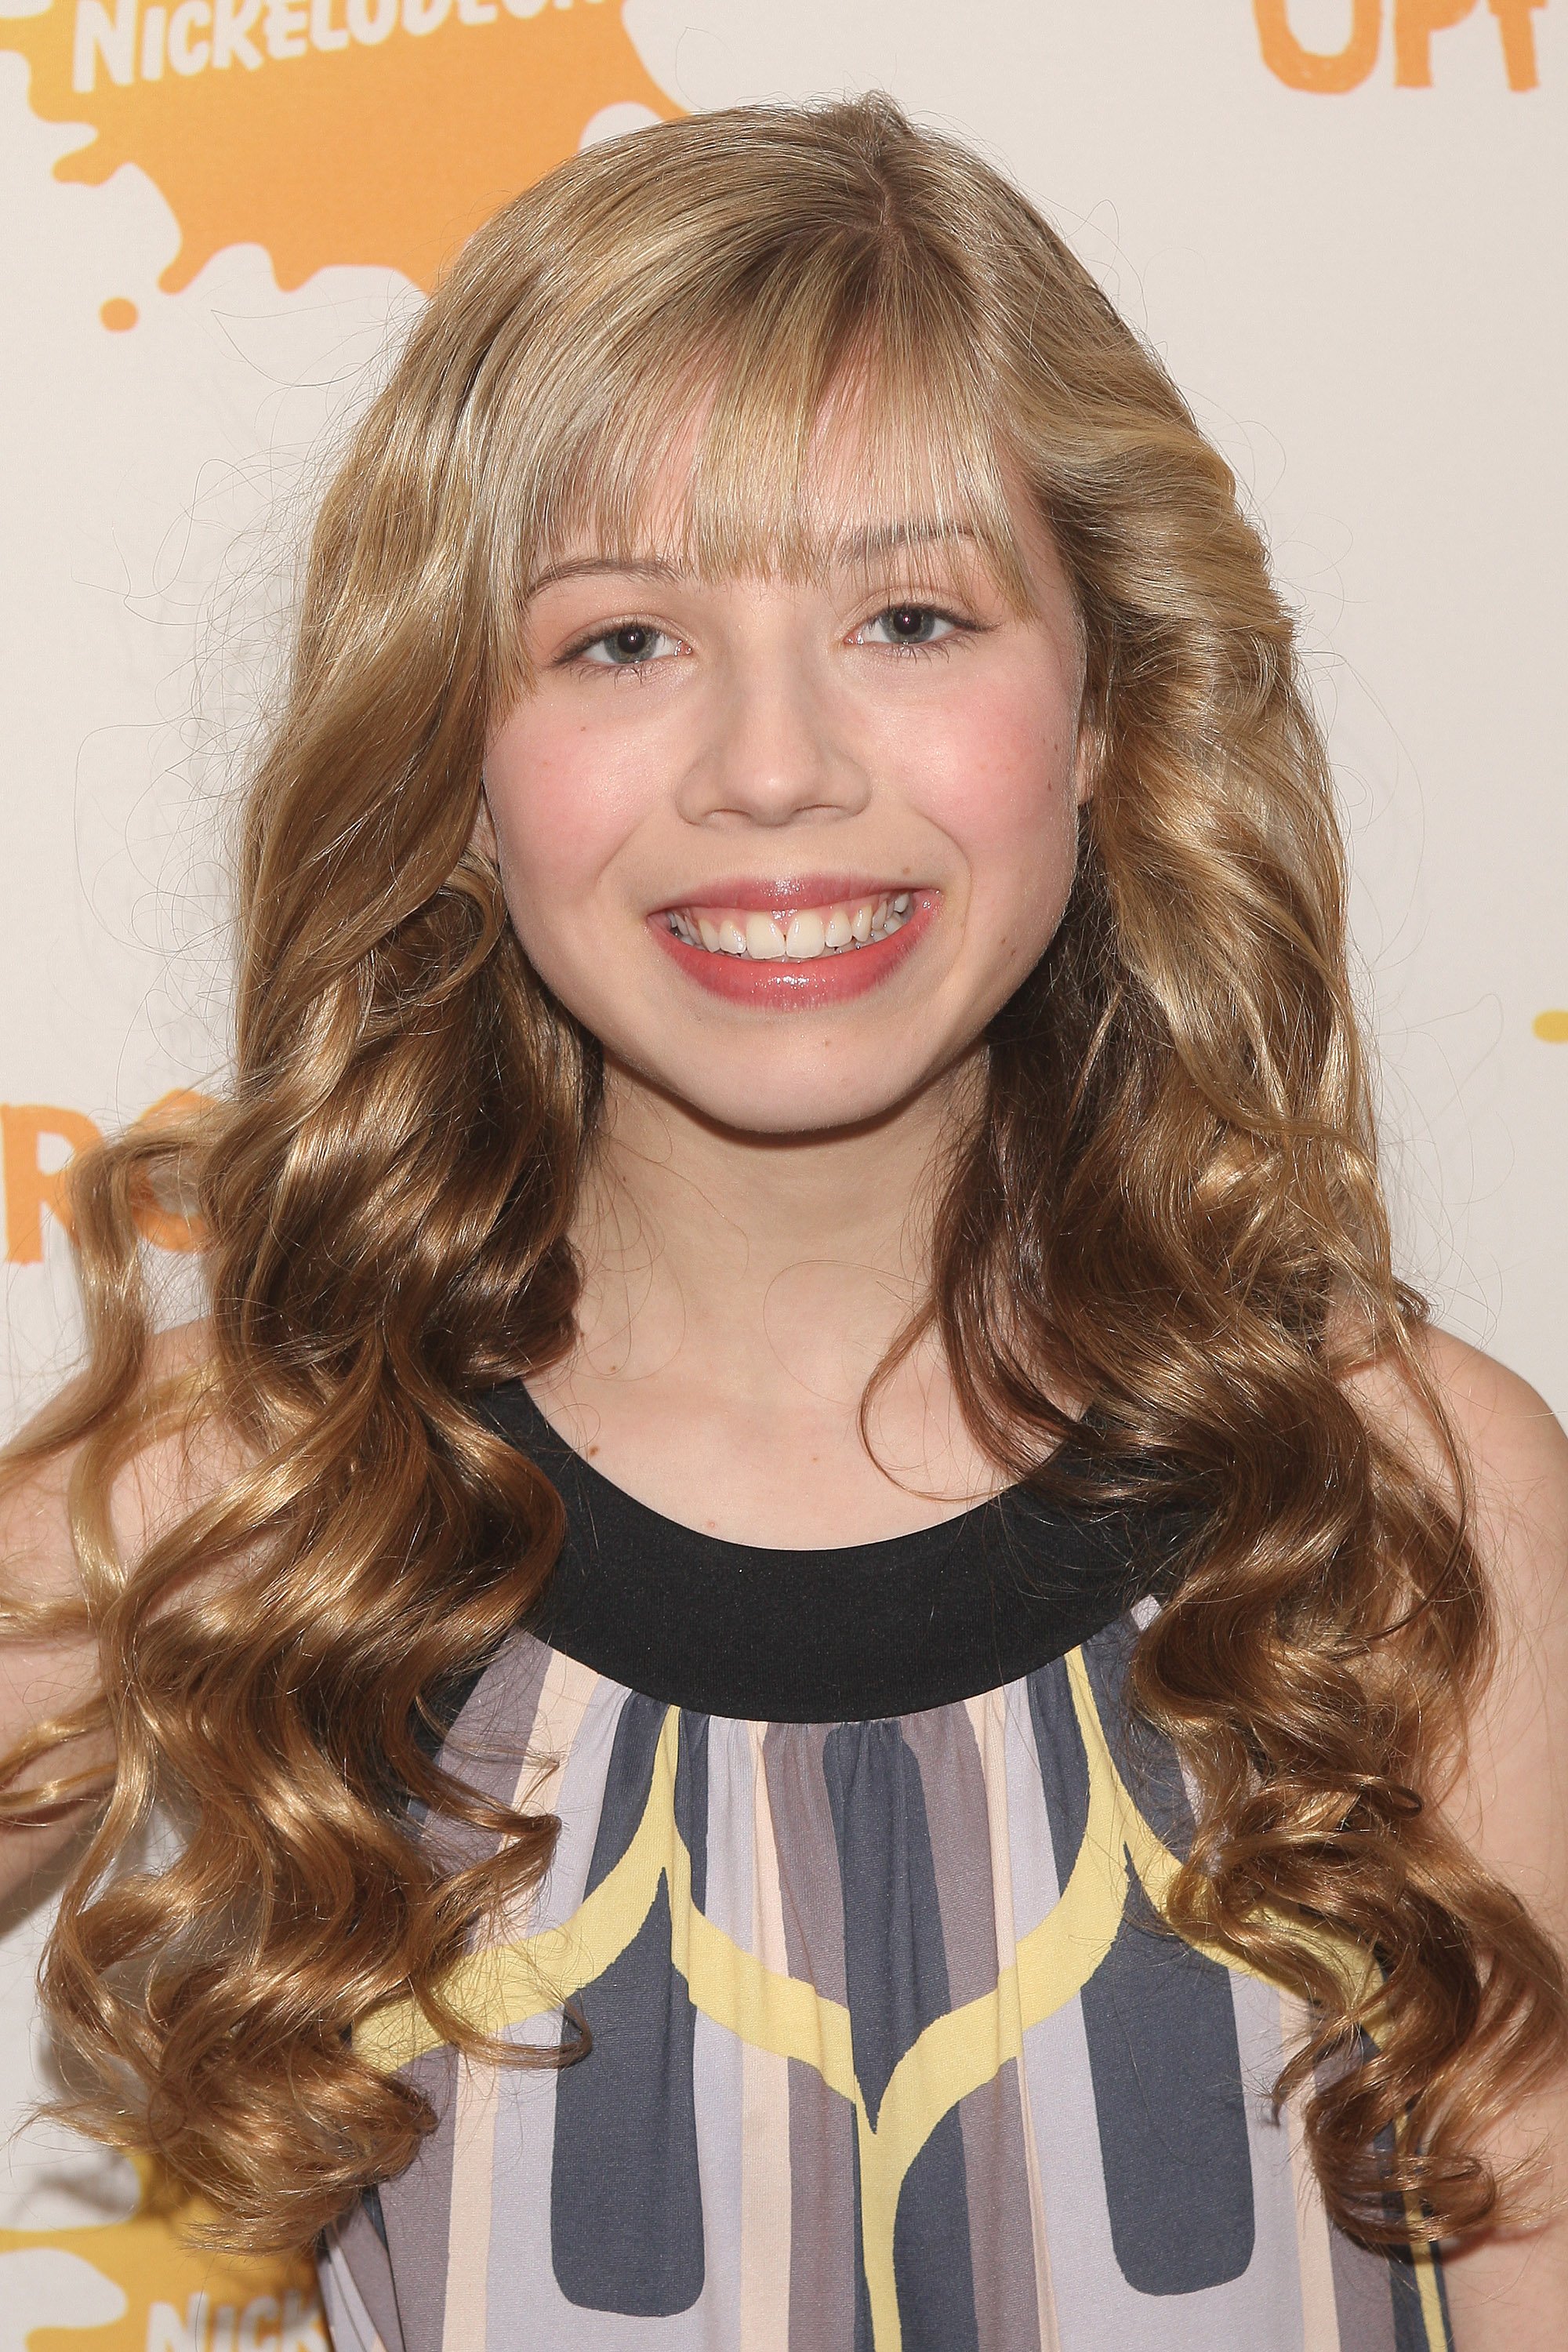 Jennette McCurdy at the Nickelodeon 2008 upfront presentation on March 13, 2008 | Source: Getty Images